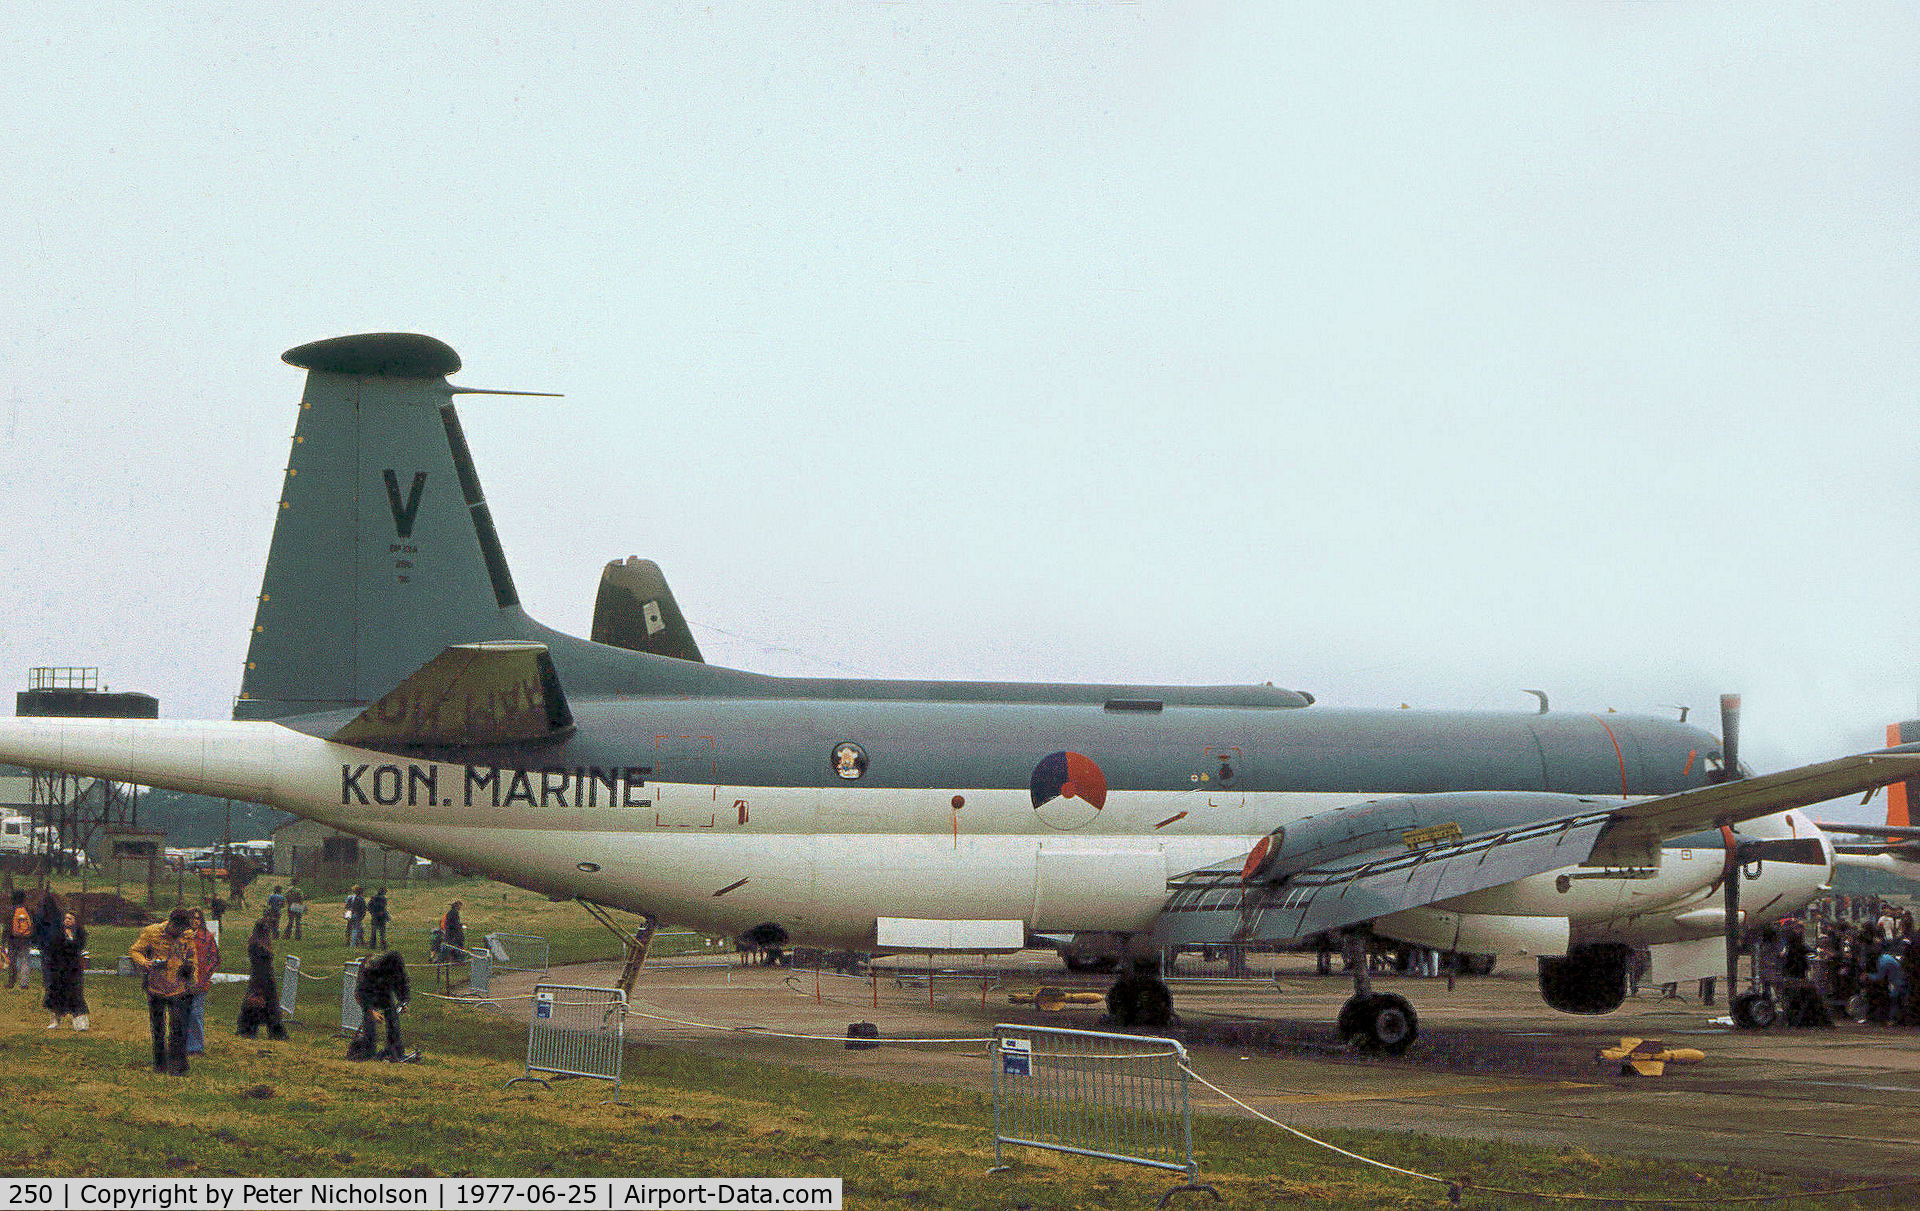 250, Breguet SP-13A Atlantic C/N 55, SP-13A Atlantic of 321 Squadron Royal Netherlands Navy on display at the 1977 Intnl Air Tattoo at RAF Greenham Common.